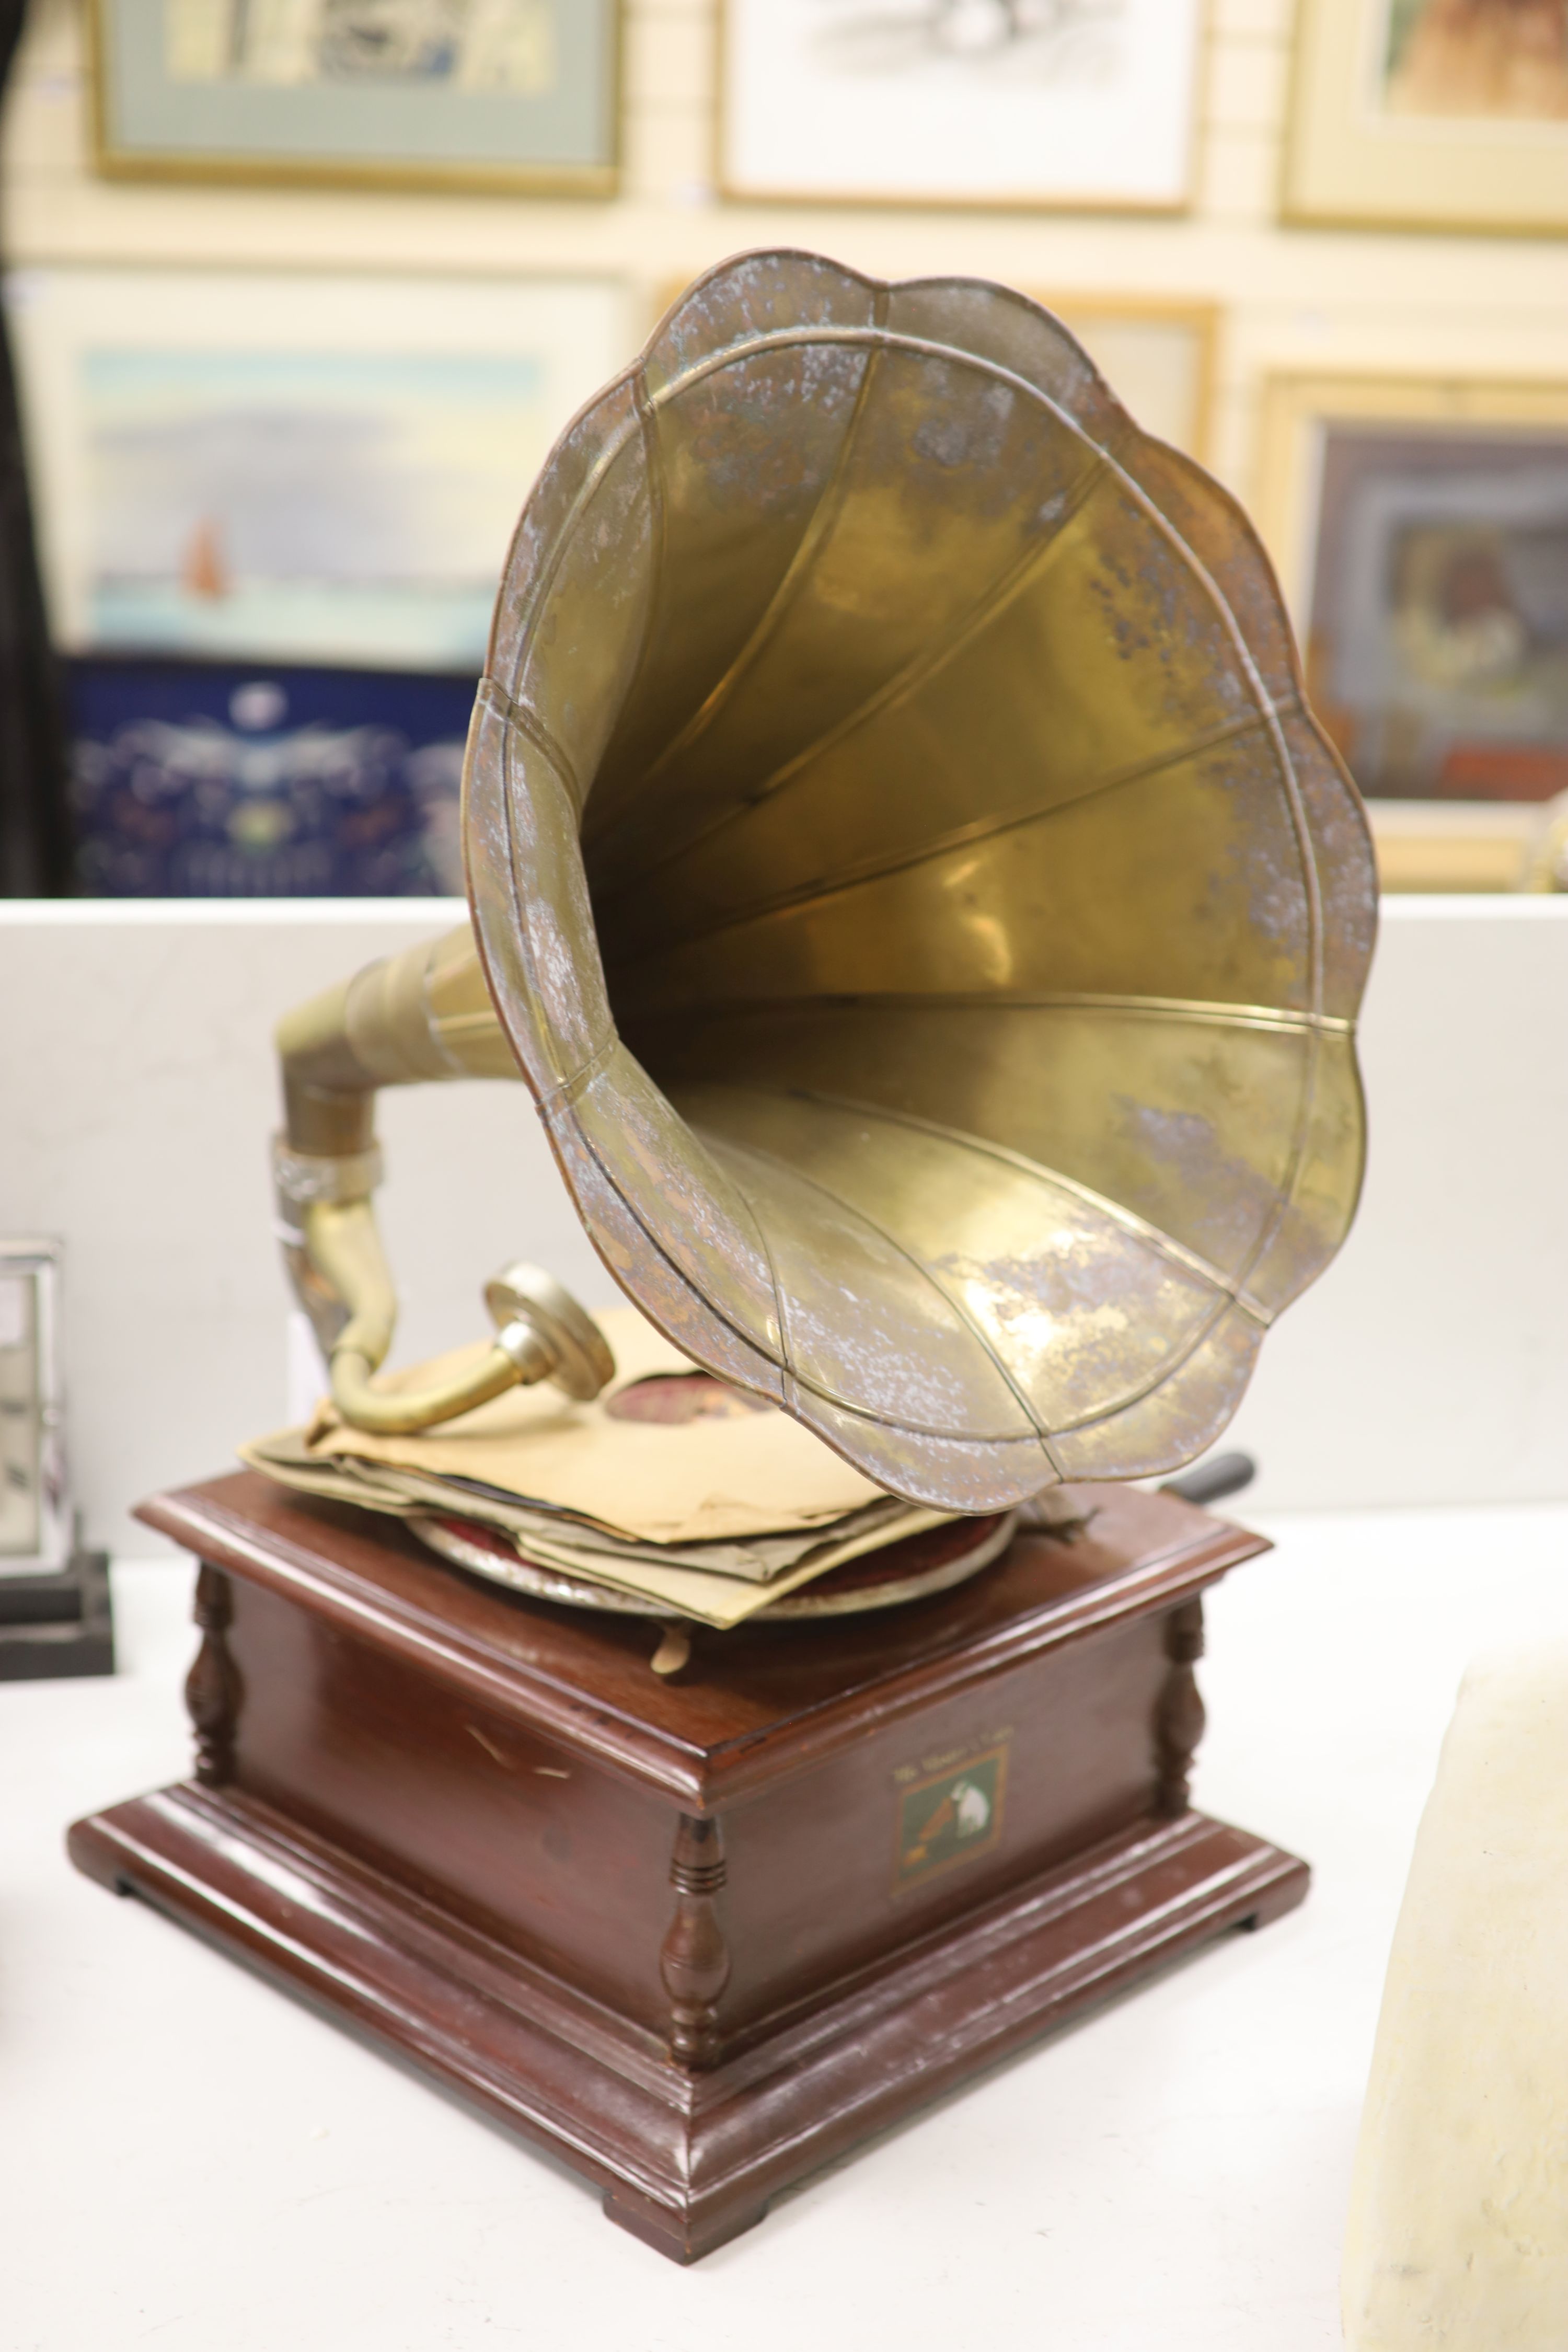 An HMV wind up gramophone with brass horn and three discs